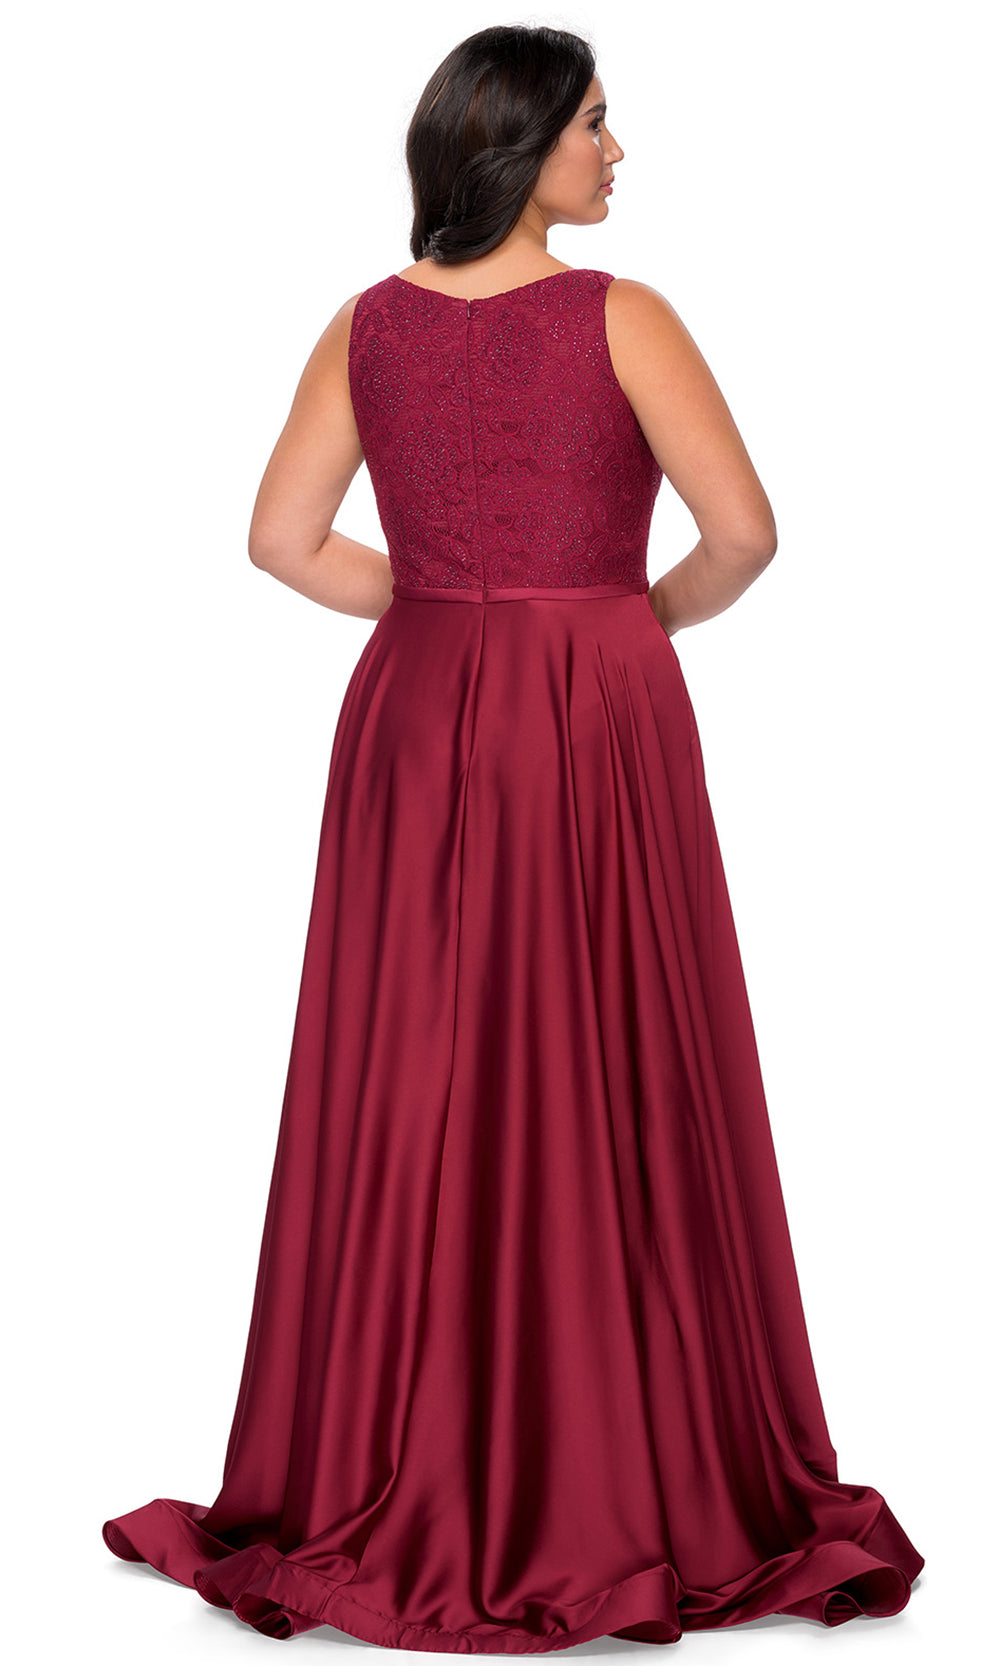 La Femme - 29004 Lace V Neck Satin A-Line Gown In Red